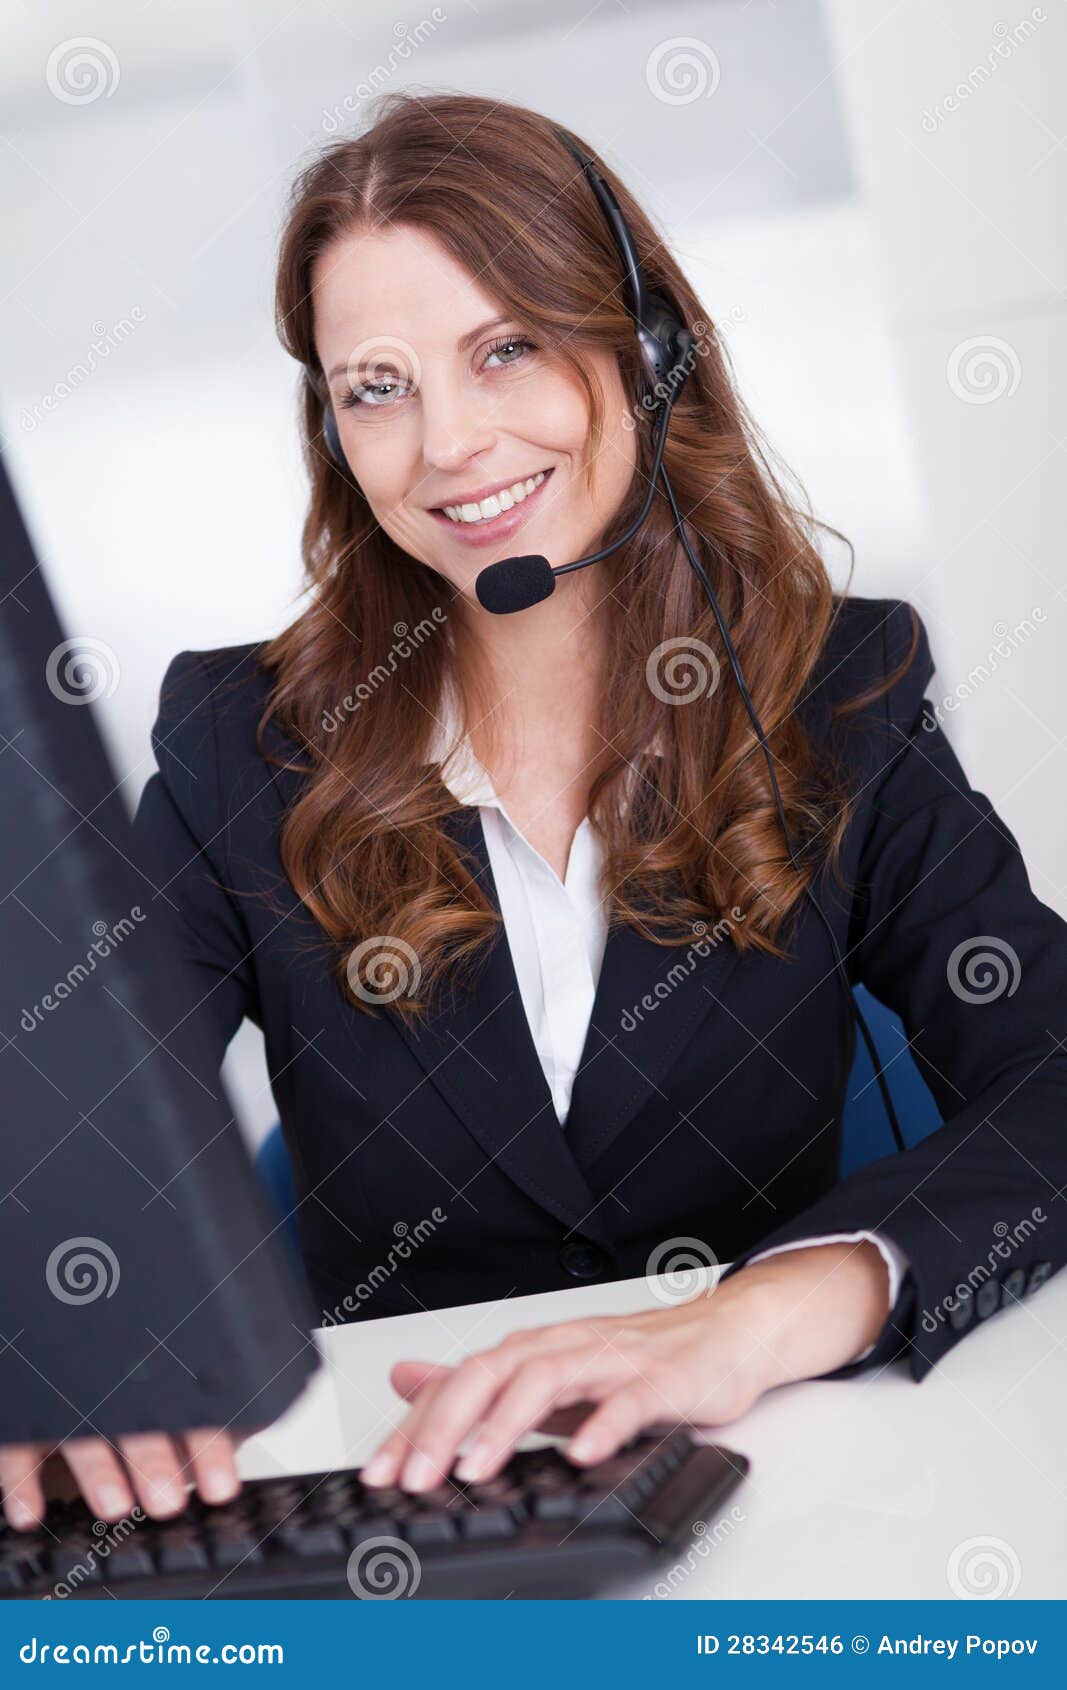 smiling receptionist or call centre worker